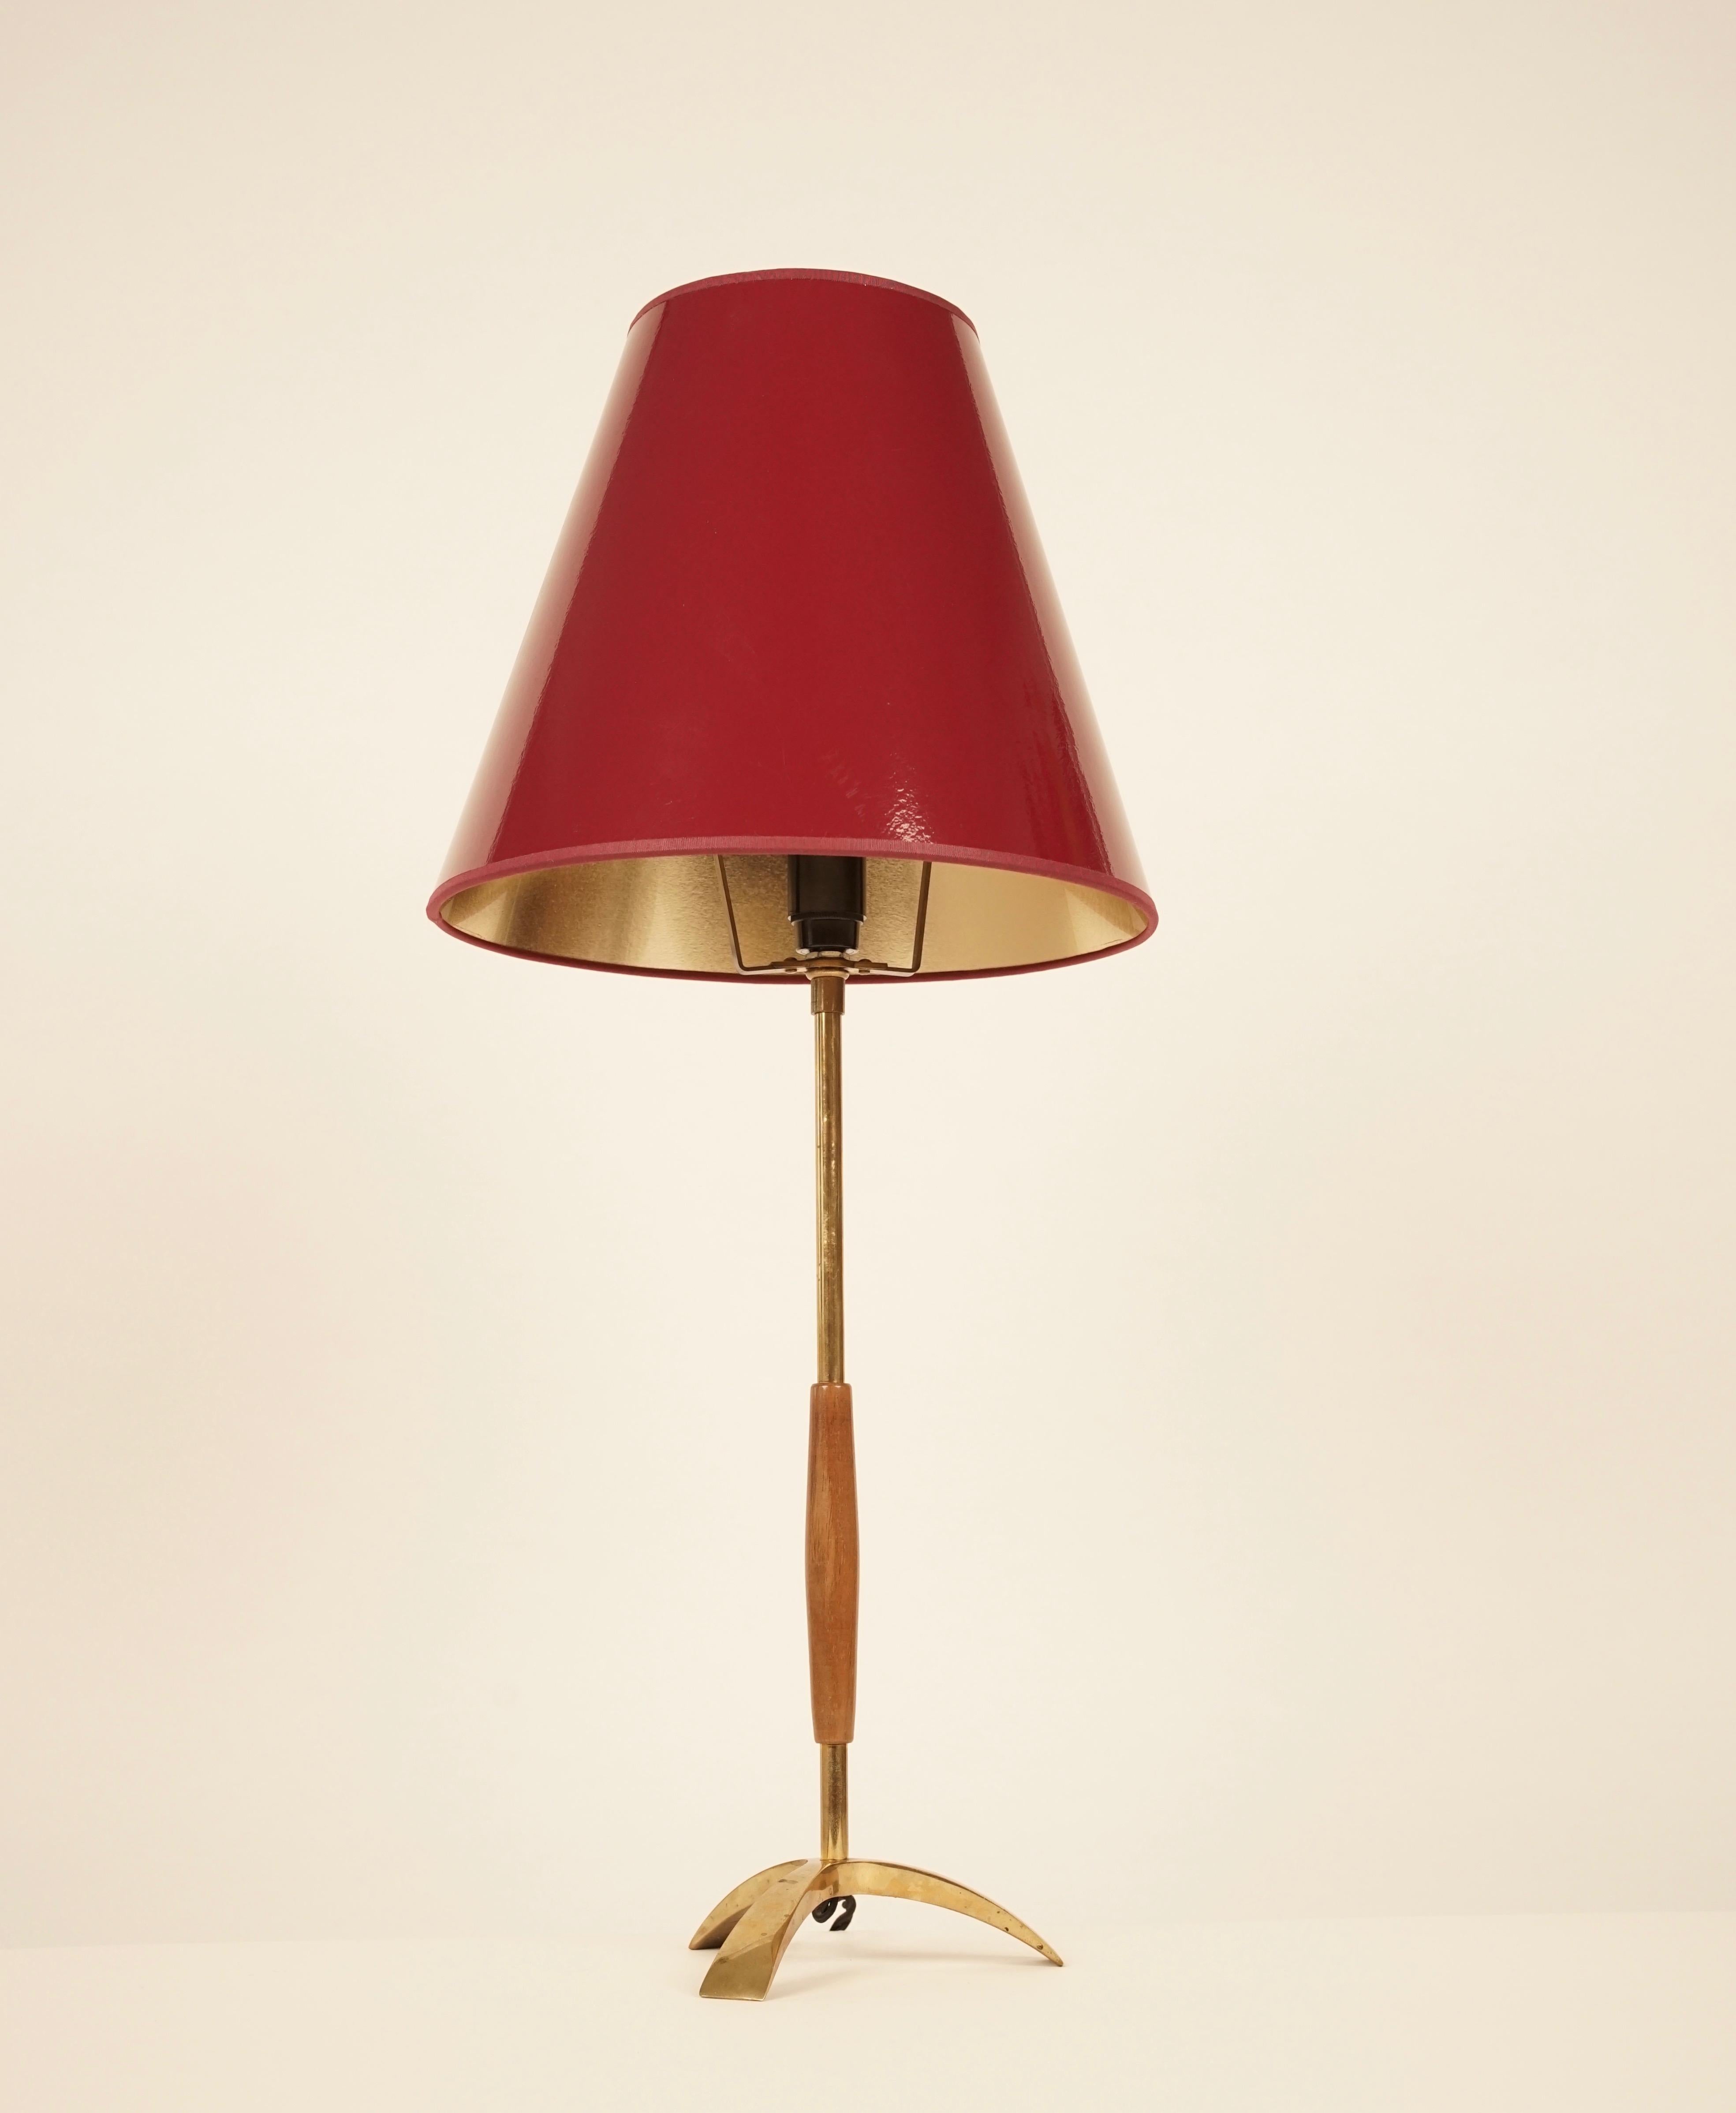 A tall simple elegant table lamp from Kalmar. Made from brass and wood. The lamp now has a new shade in wine red with a reflective gold lining. 
The gold lining accents the light to a beautiful effect.